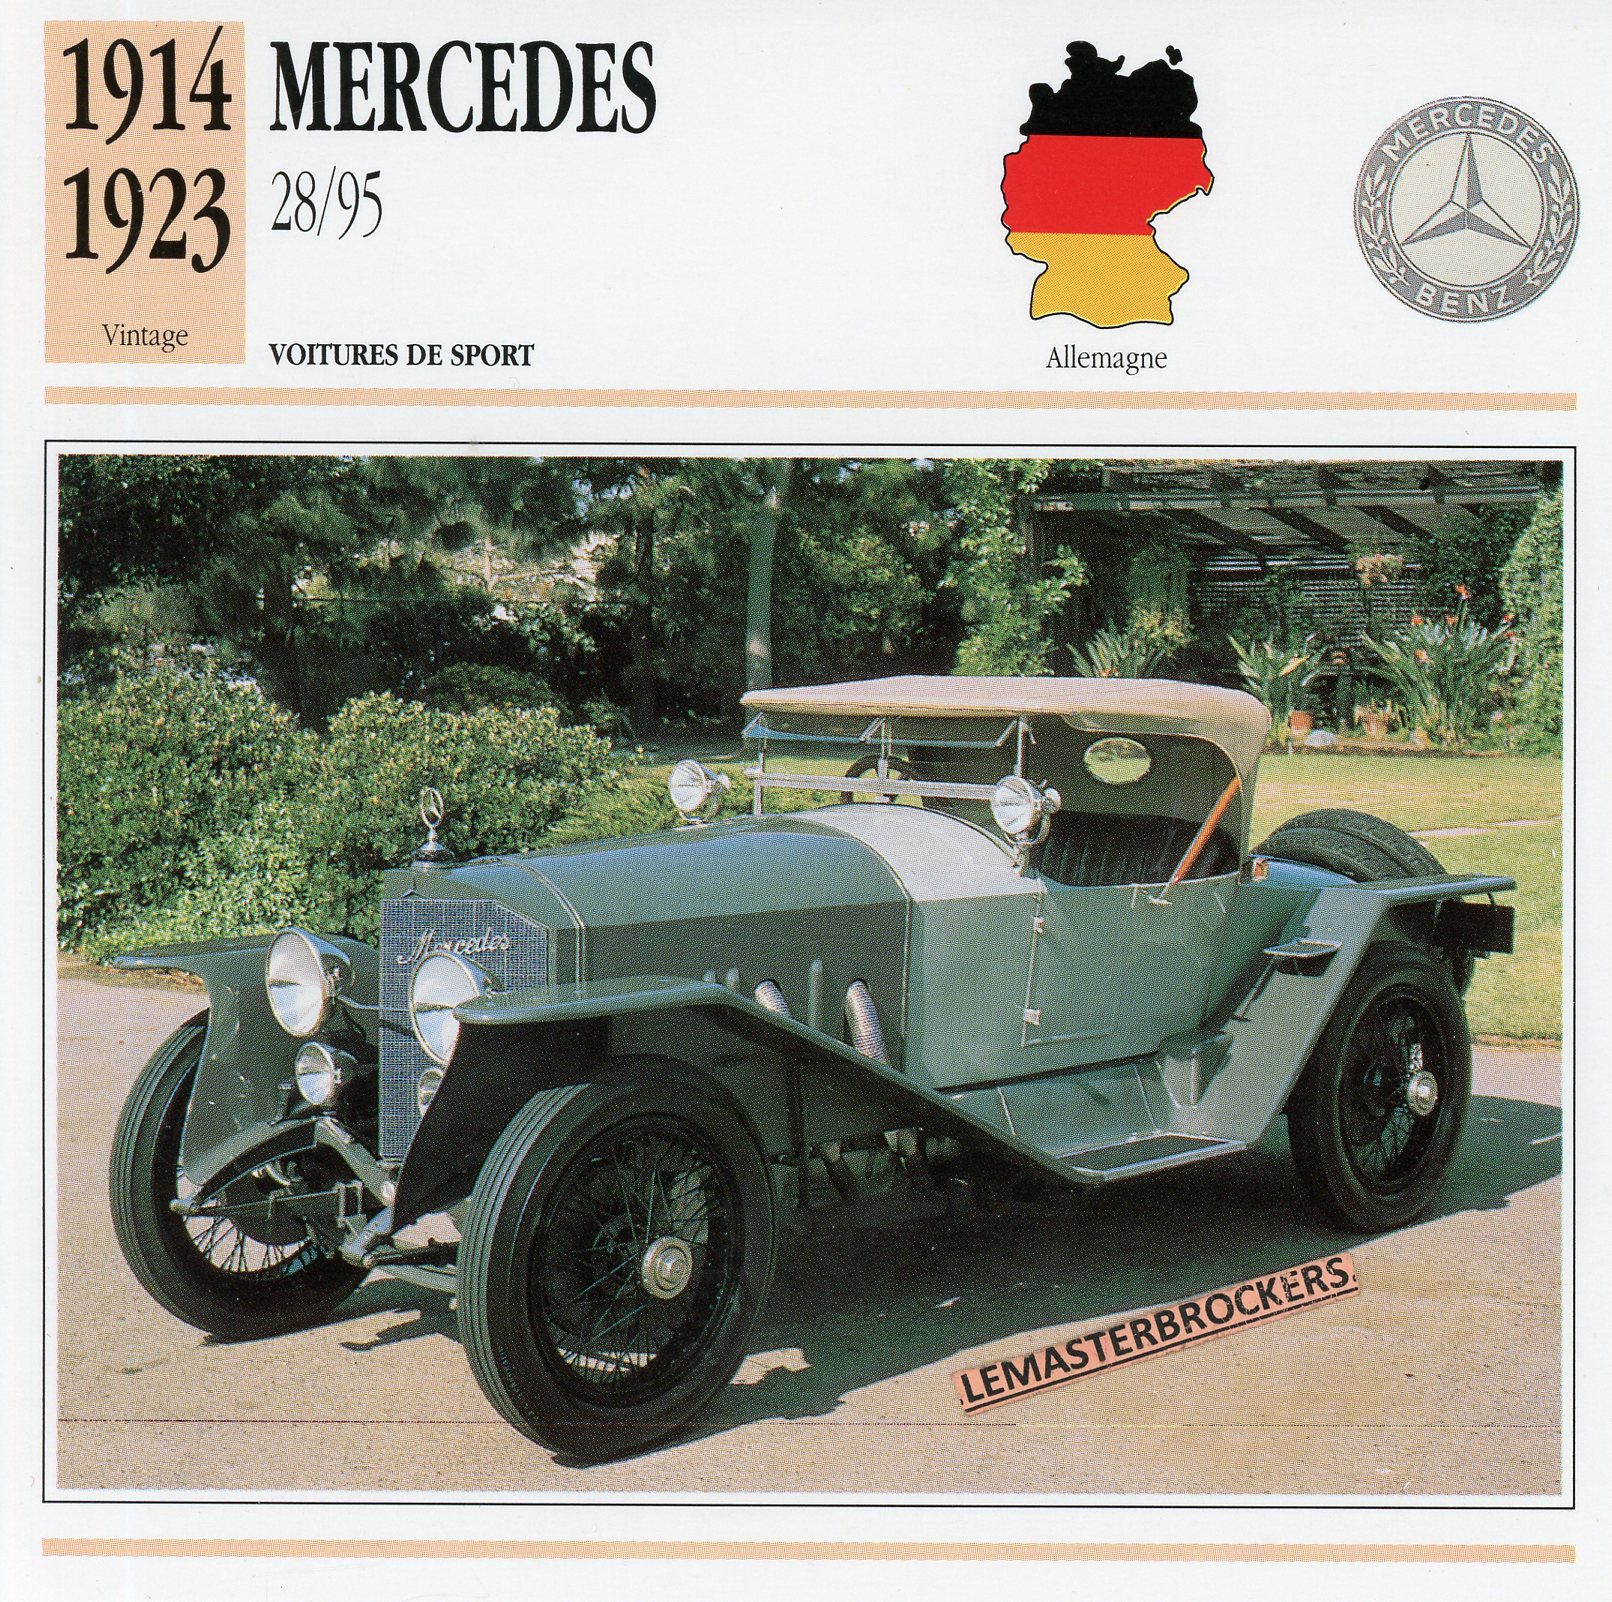 FICHE-AUTO-MERCEDES-28-95-1914-1923-LEMASTERBROCKERS-CARS-CARD